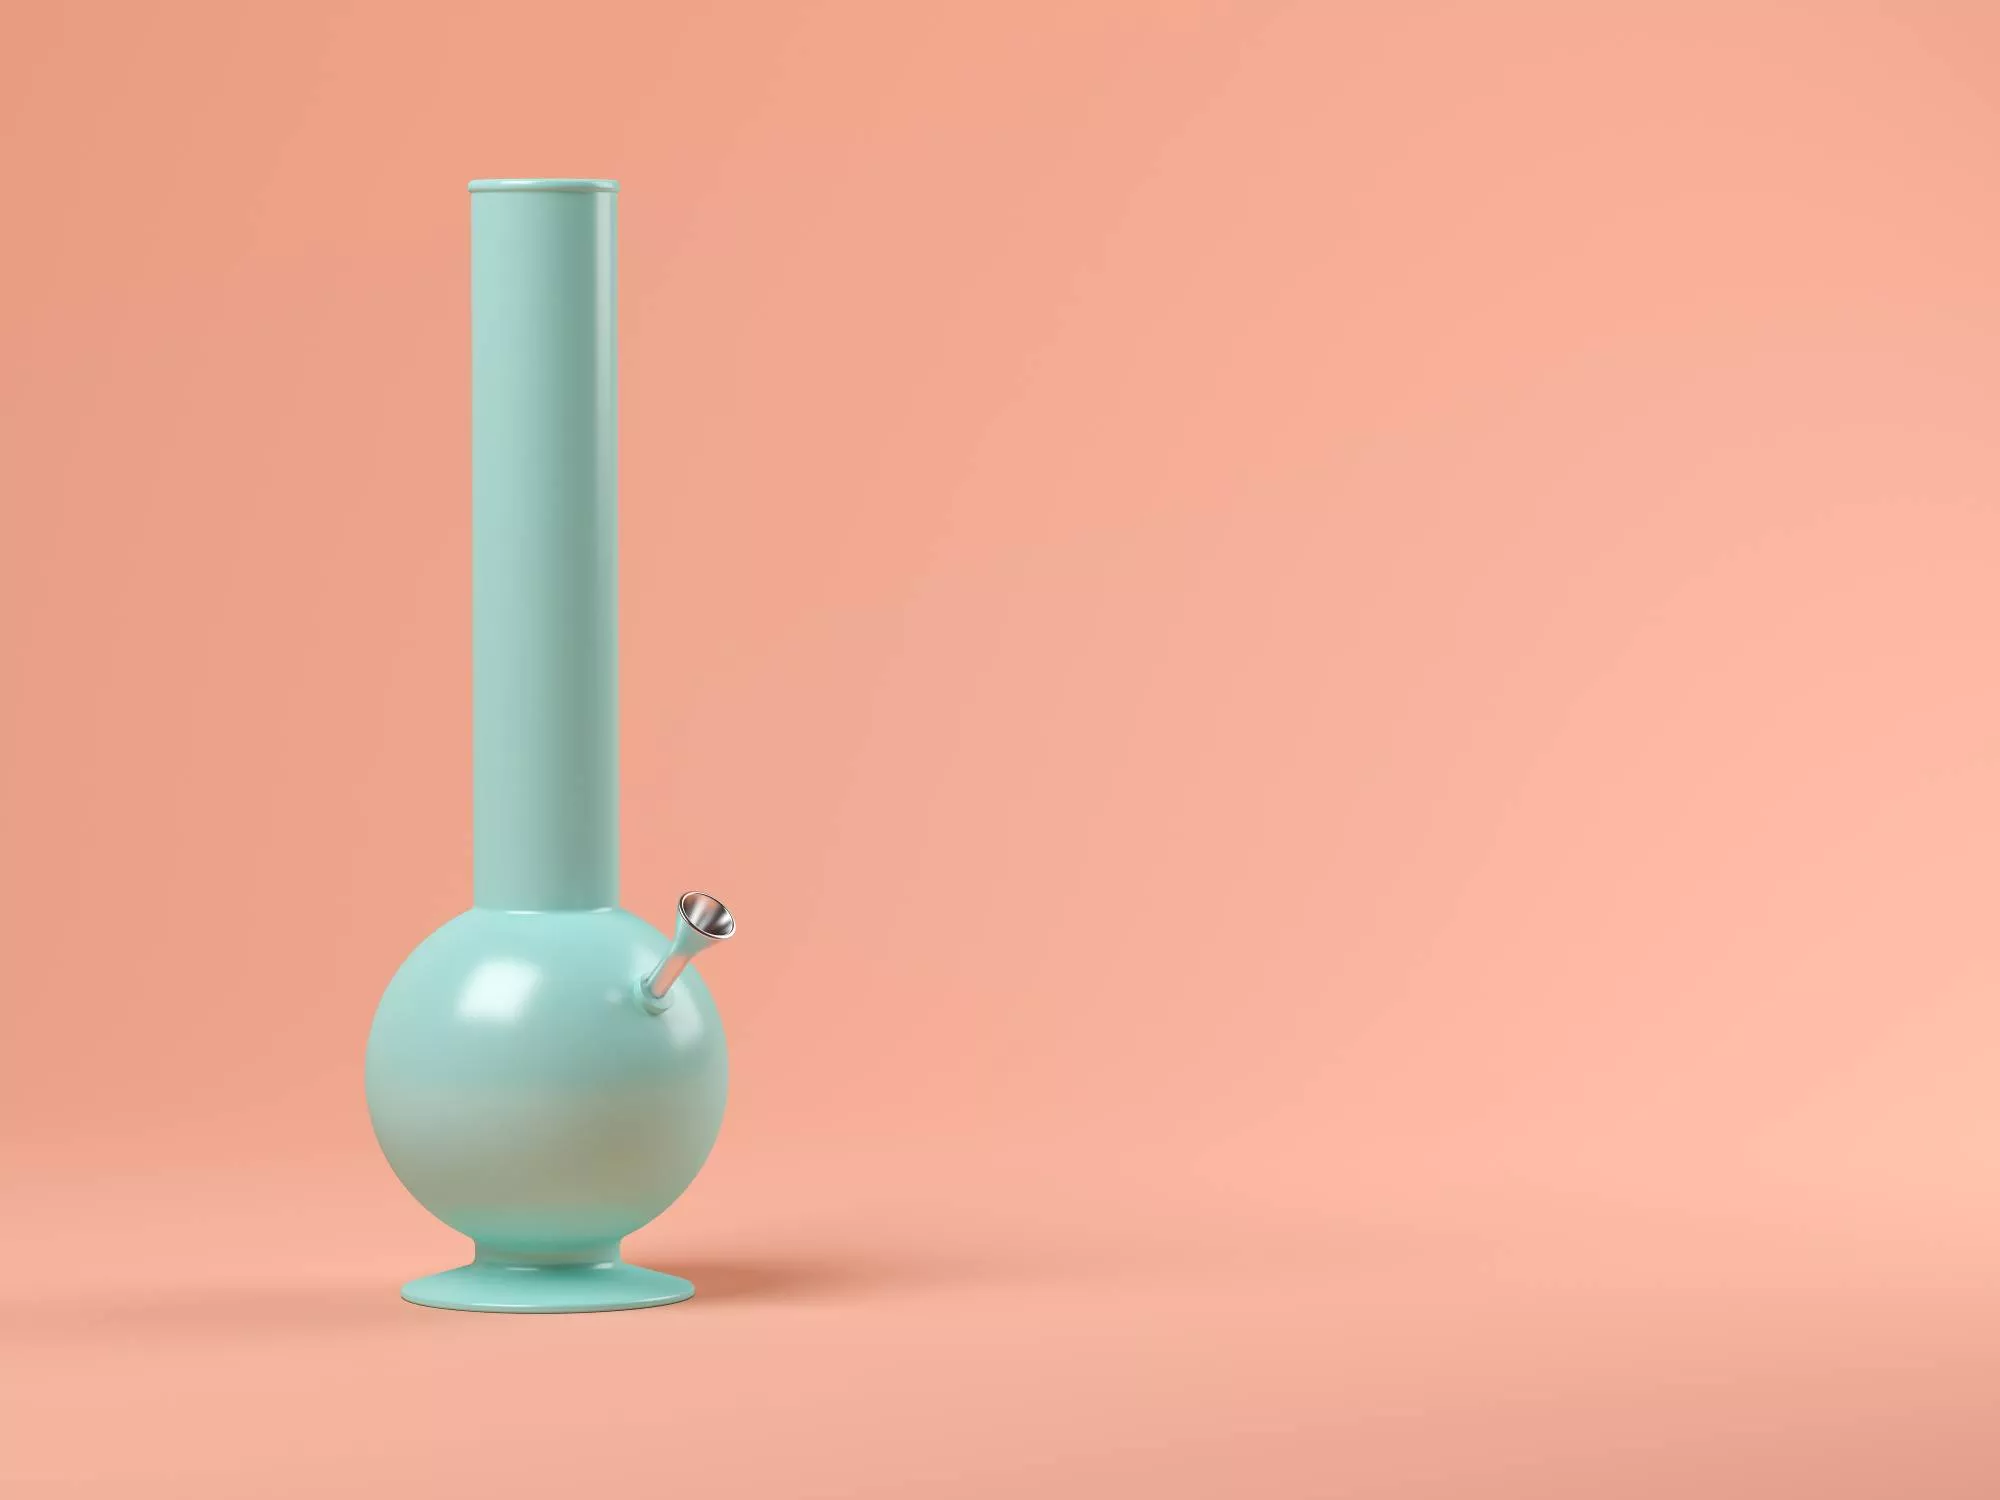 Blue, dropship bong on a pink background.